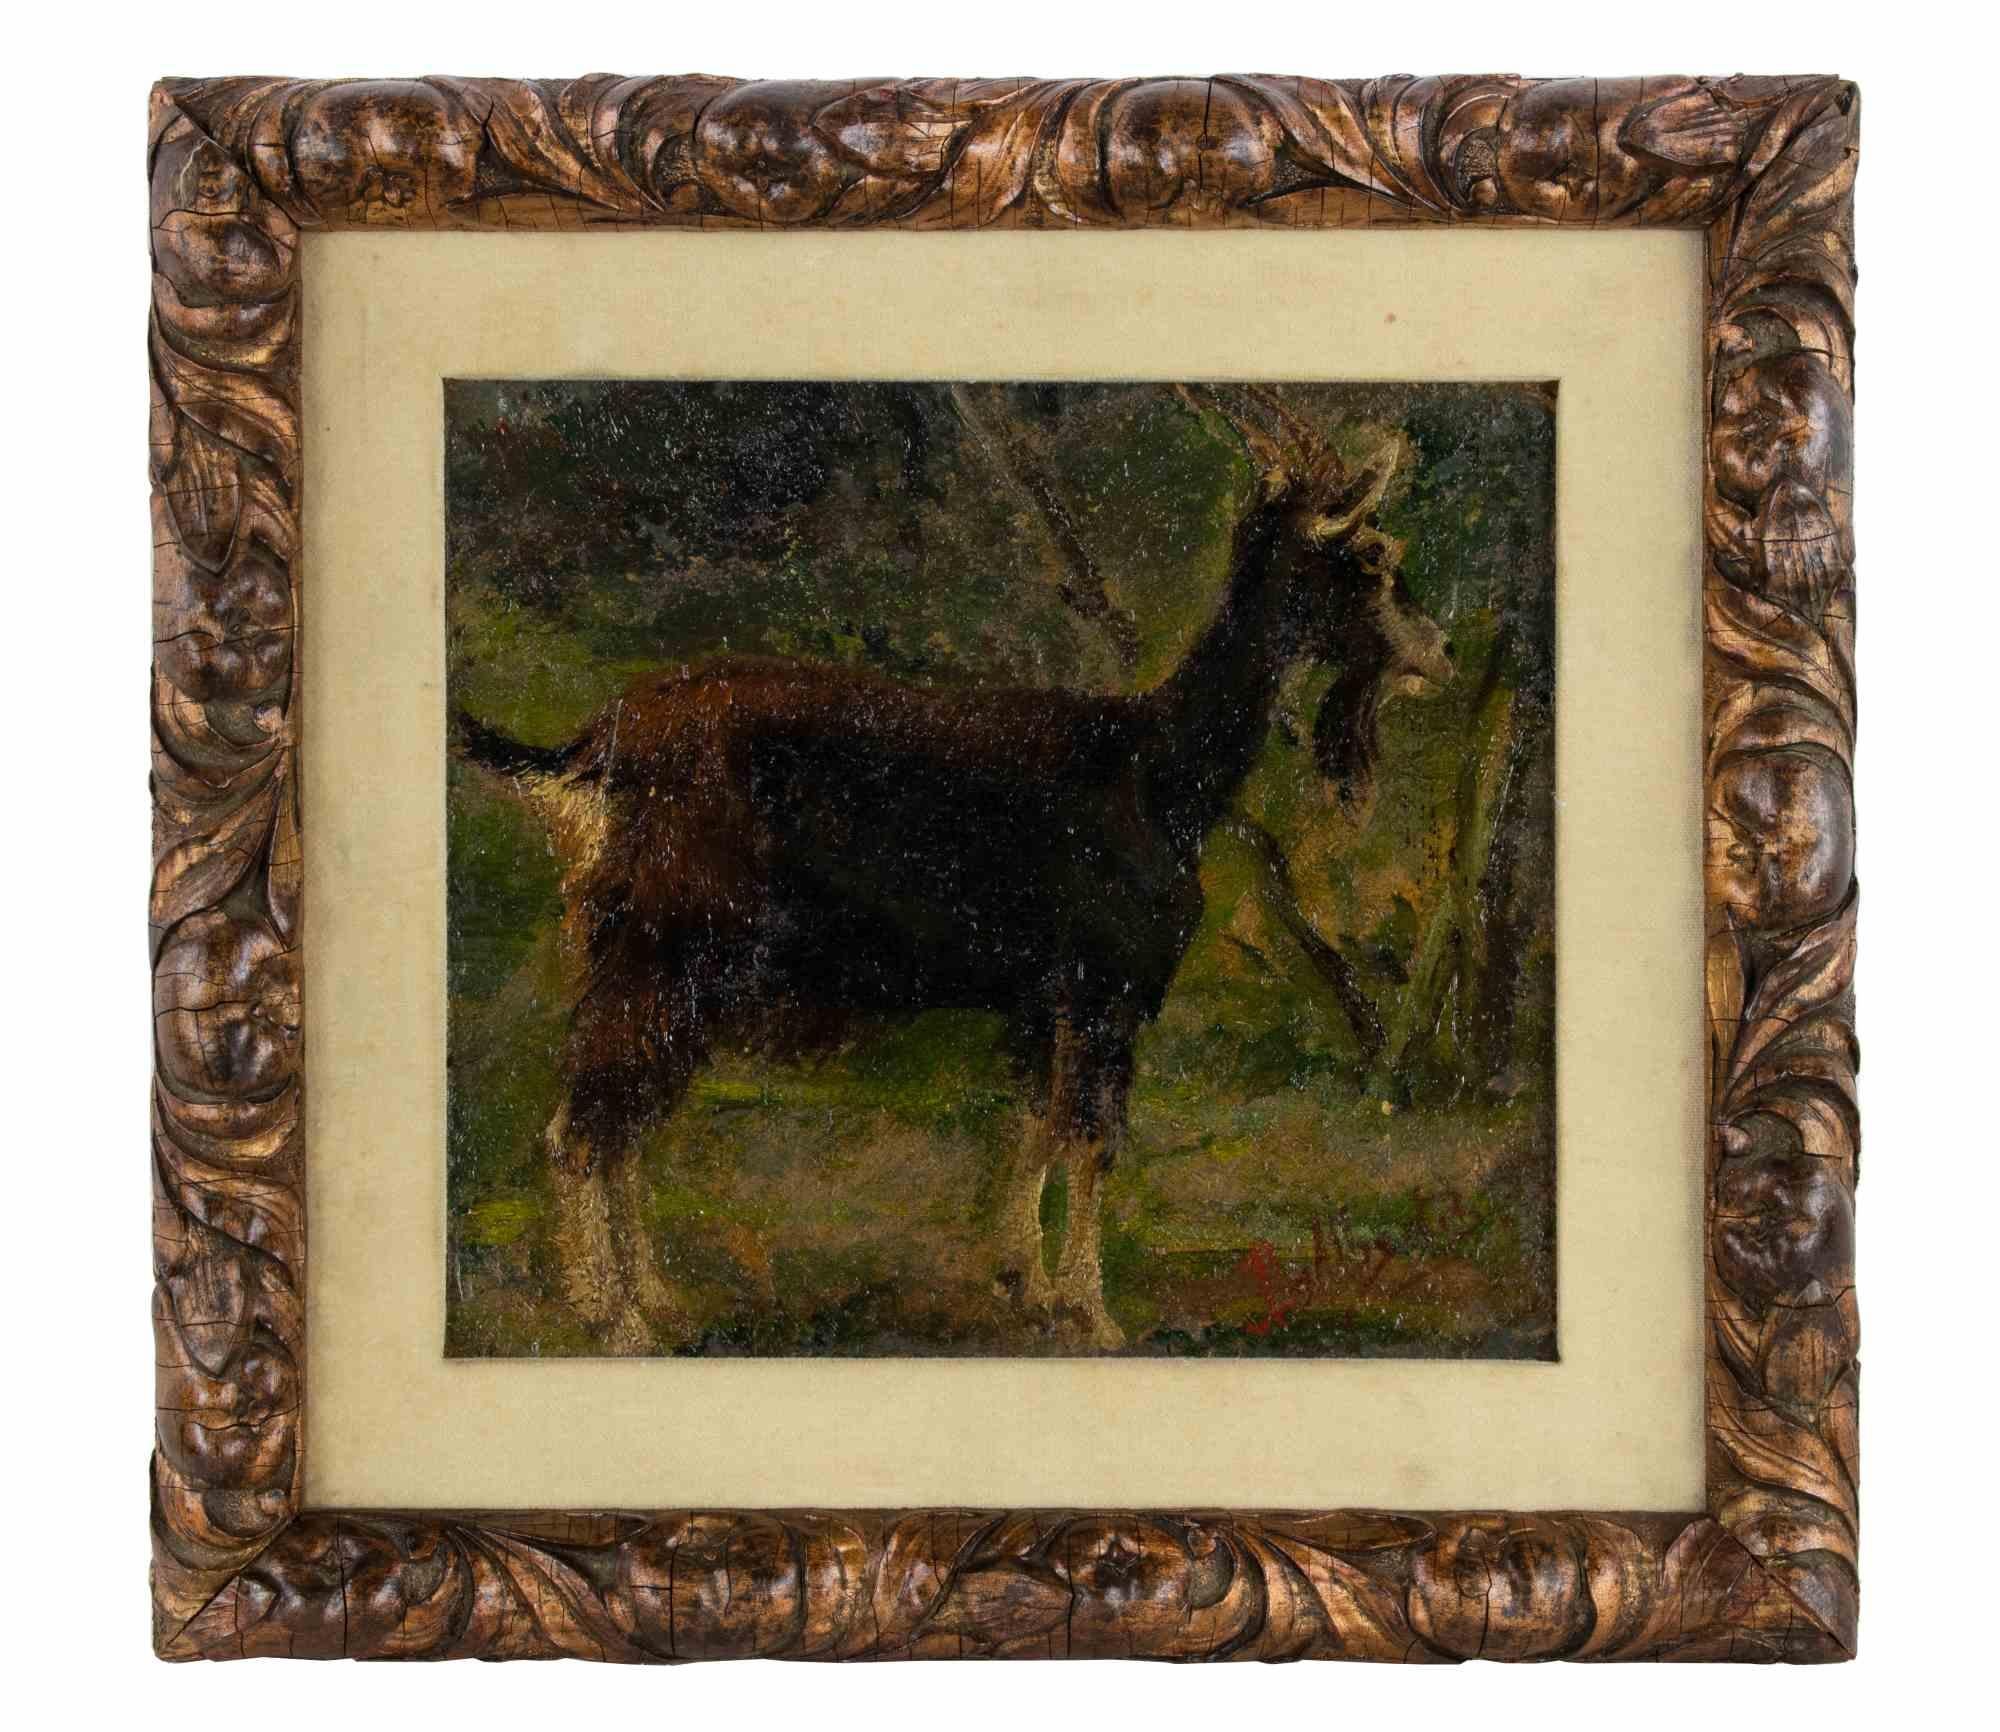 Sheep is a modern artwork realized by Sebastiano De Albertis in 19th Century.

Mixed colored oil on plywood.

Hand signed by the artist.

Includes frame: 38 x 41 cm

Antonio Feltrinelli (Milan, 1887 – Gargnano, 1942)
He was born in Milan on June 1,